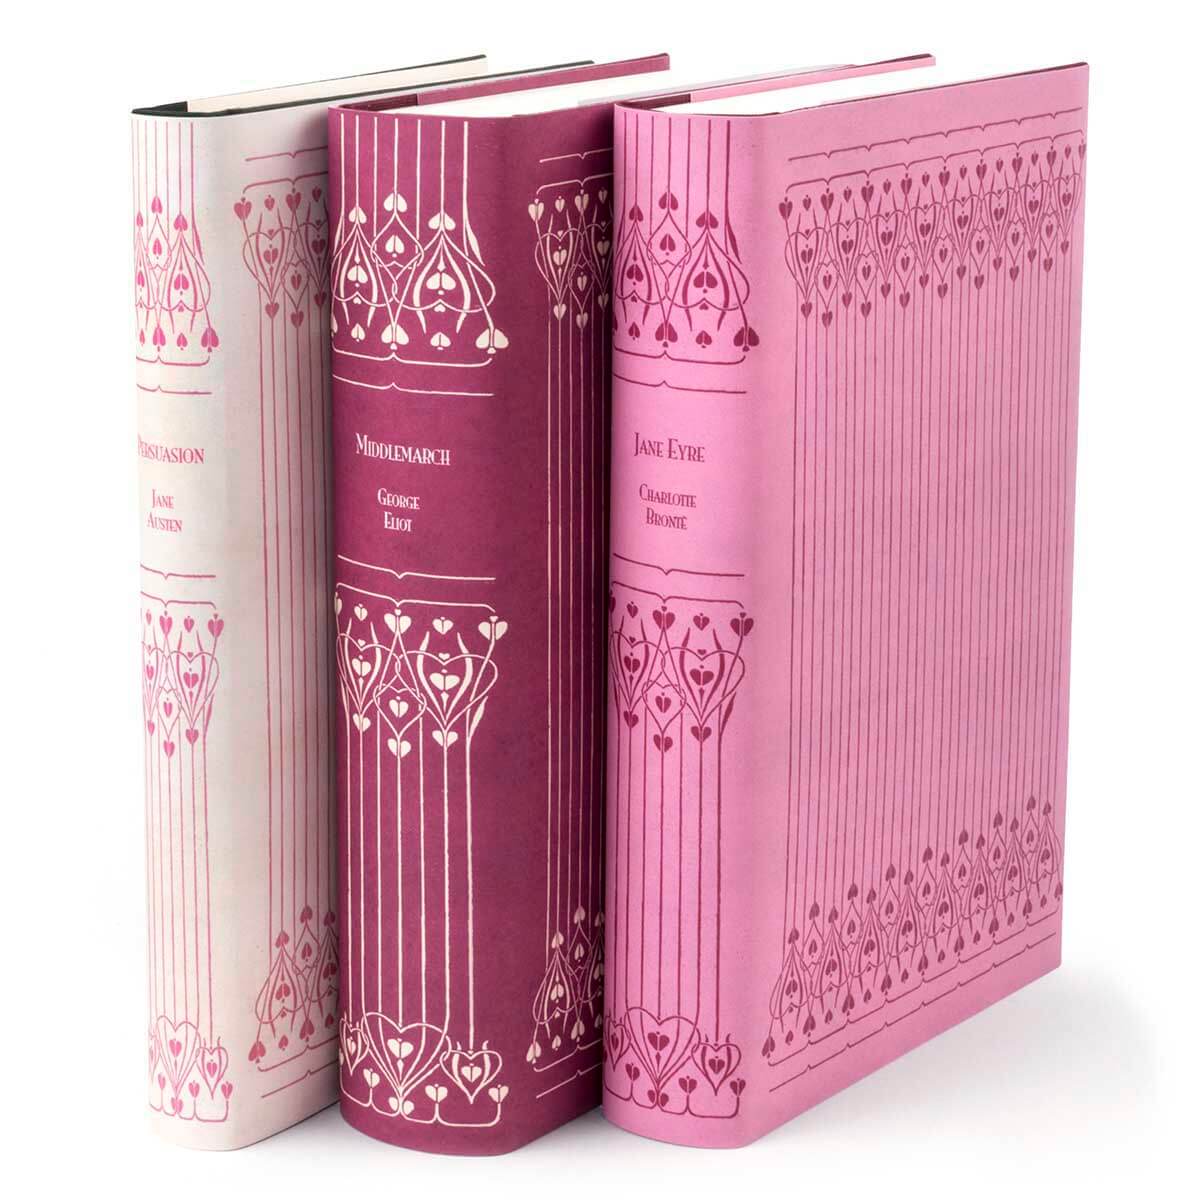 Each book included is a clothbound Everyman's Library edition, wrapped in custom-printed jackets inspired by the look of Victorian bindings. Choose from sets of three in the curated colorways Vintage Rose, London Fog, and Midnight Navy, or purchase the complete set of all nine!